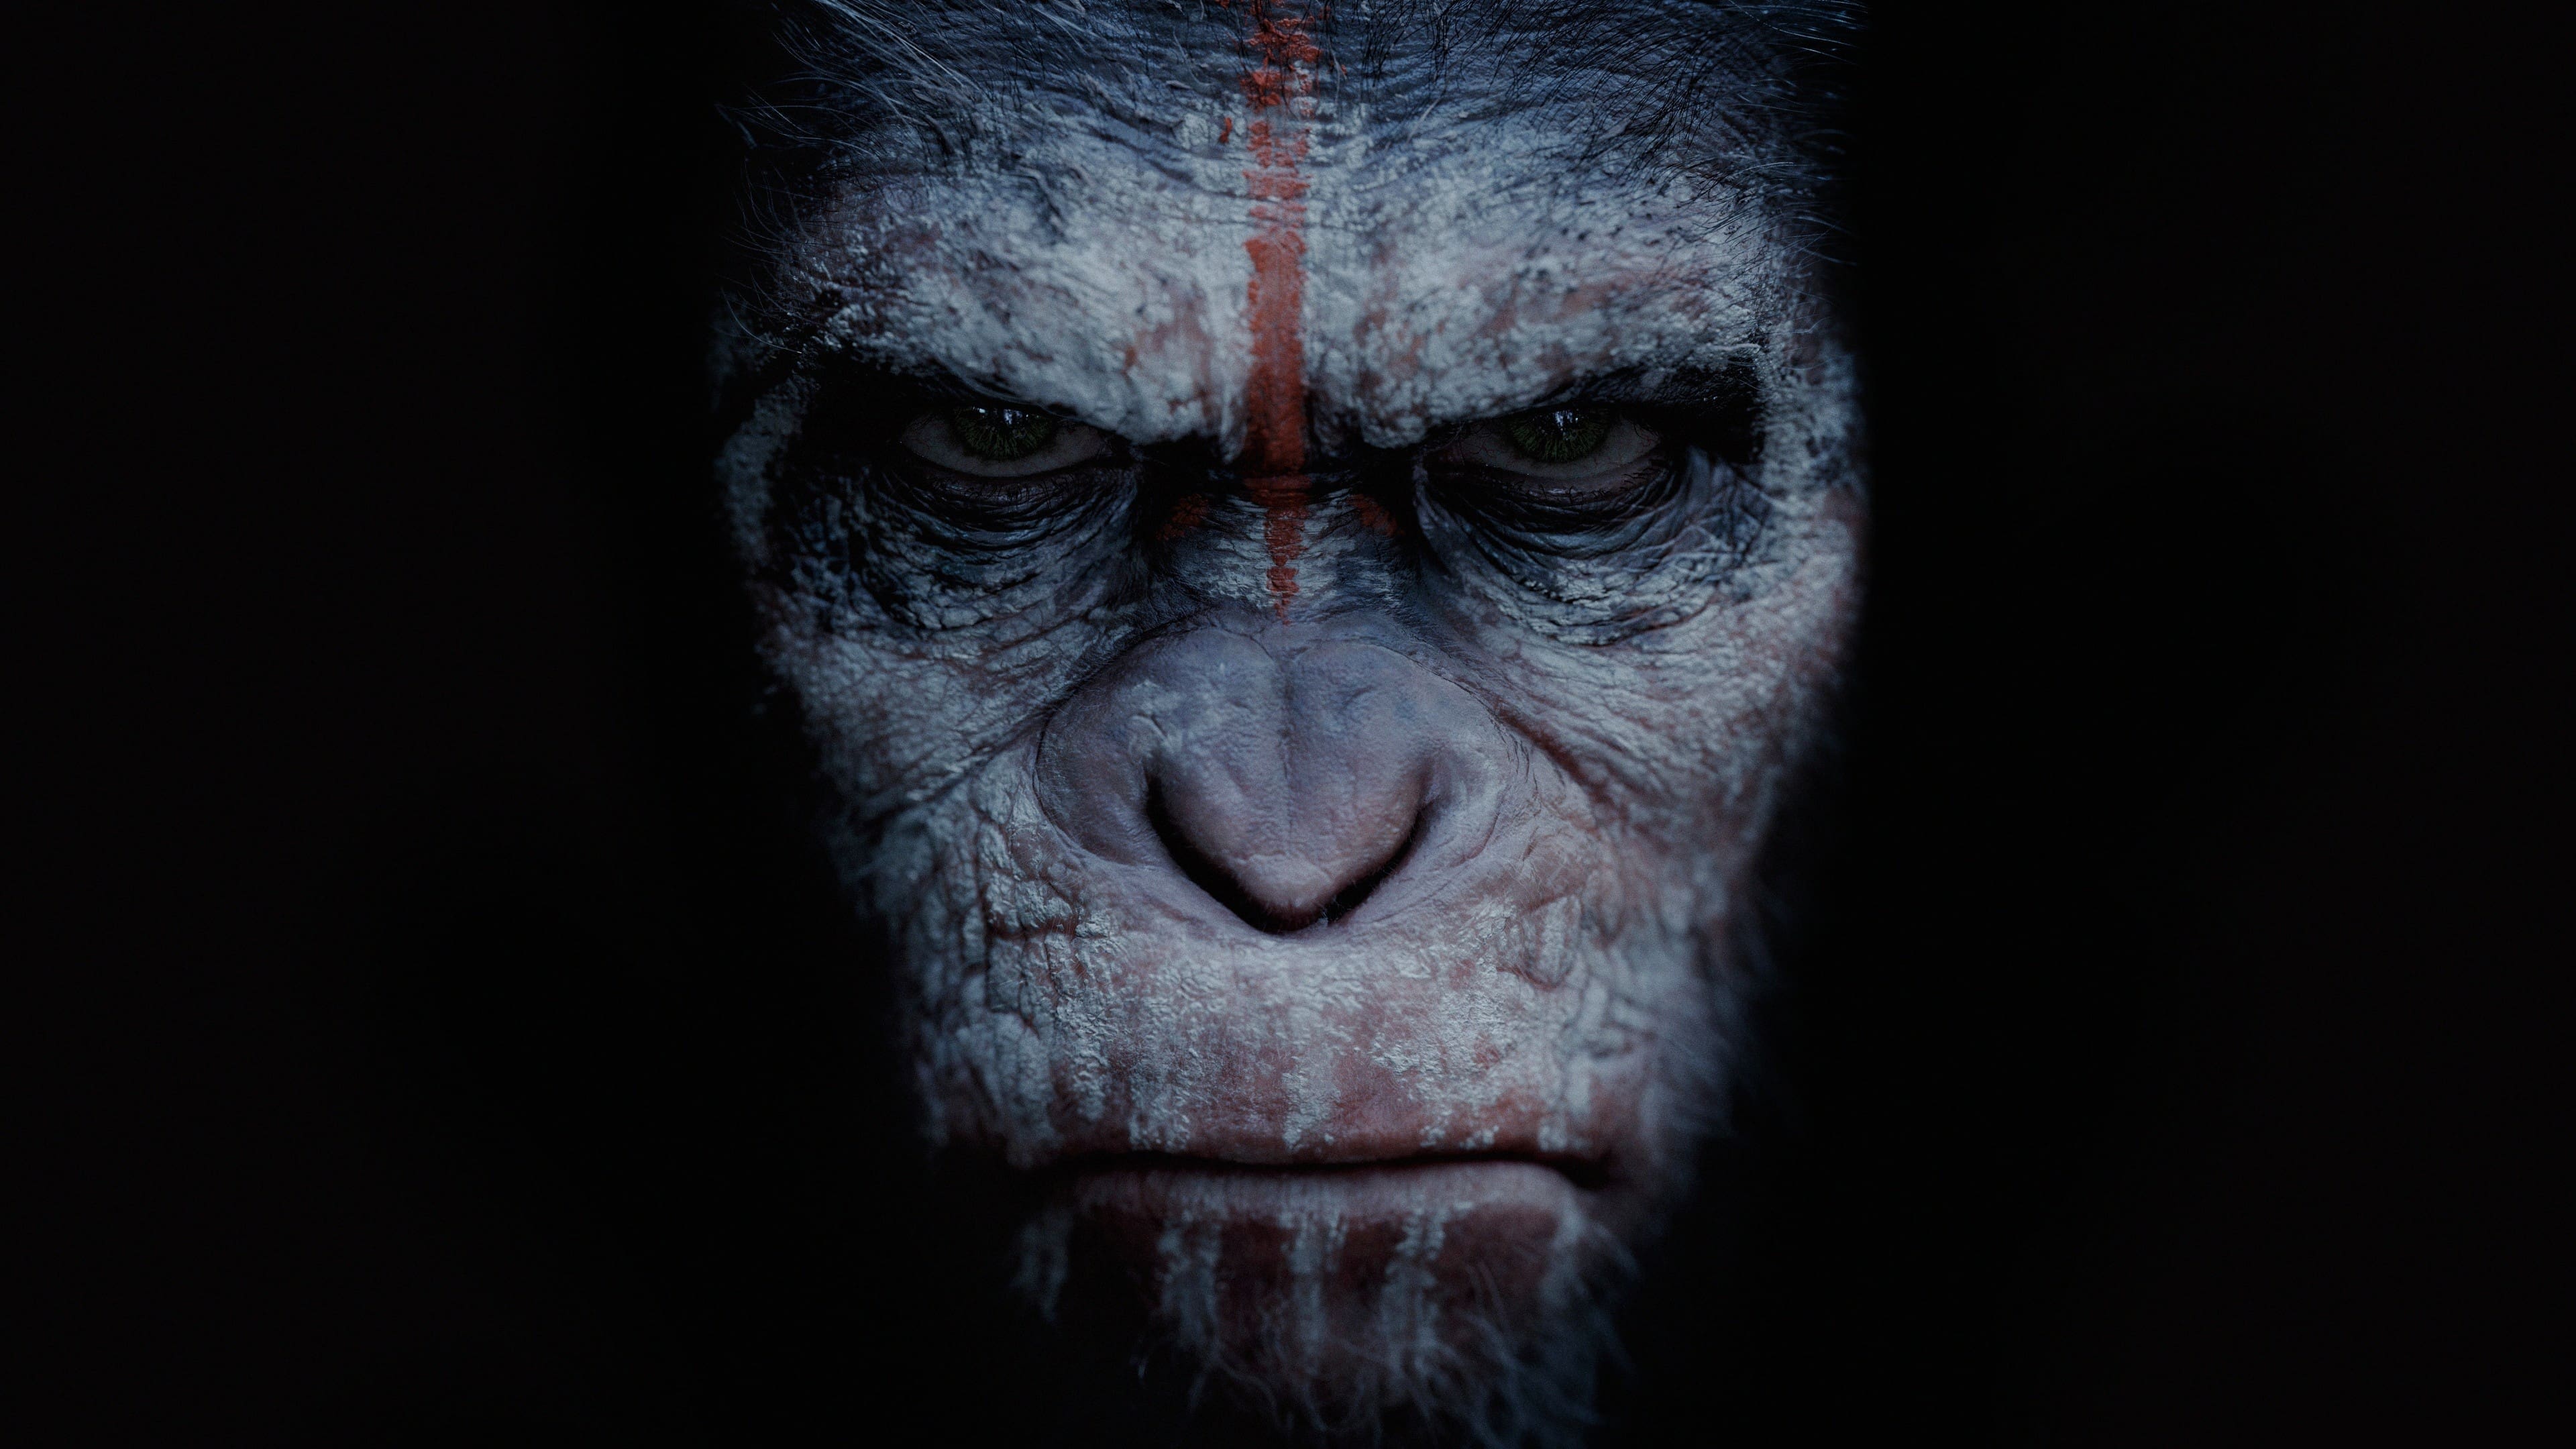 Tapeta filmu Úsvit planety opic / Dawn of the Planet of the Apes (2014)